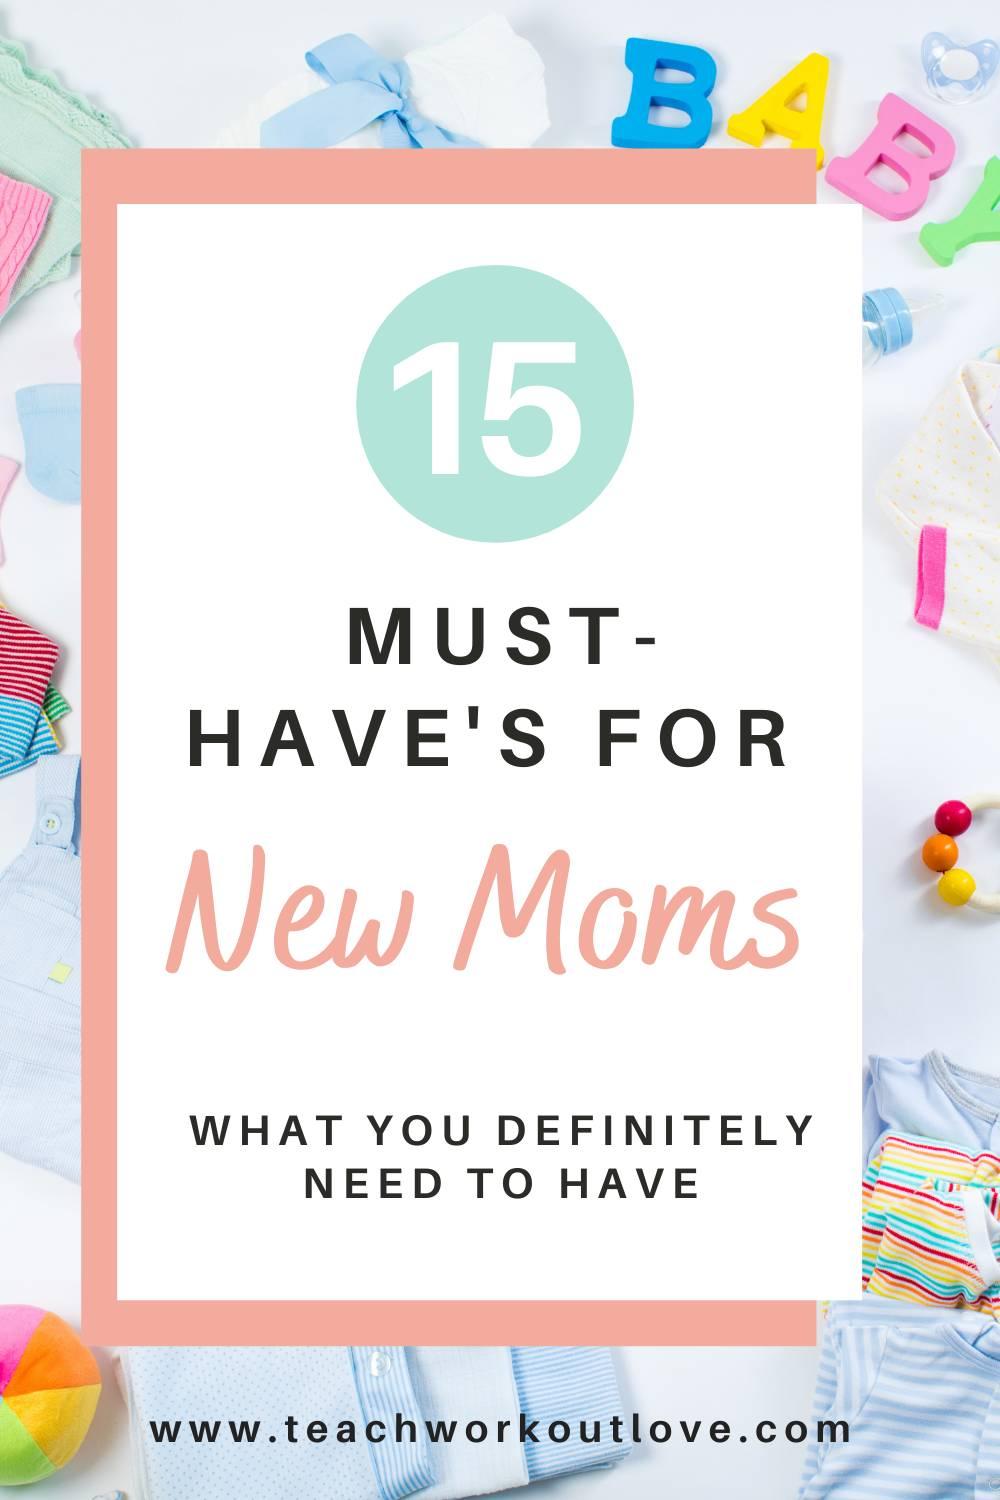 Do you need a list of what are the essentials for new moms? We have a list of top 15 items that are must-haves for new moms. Read on!